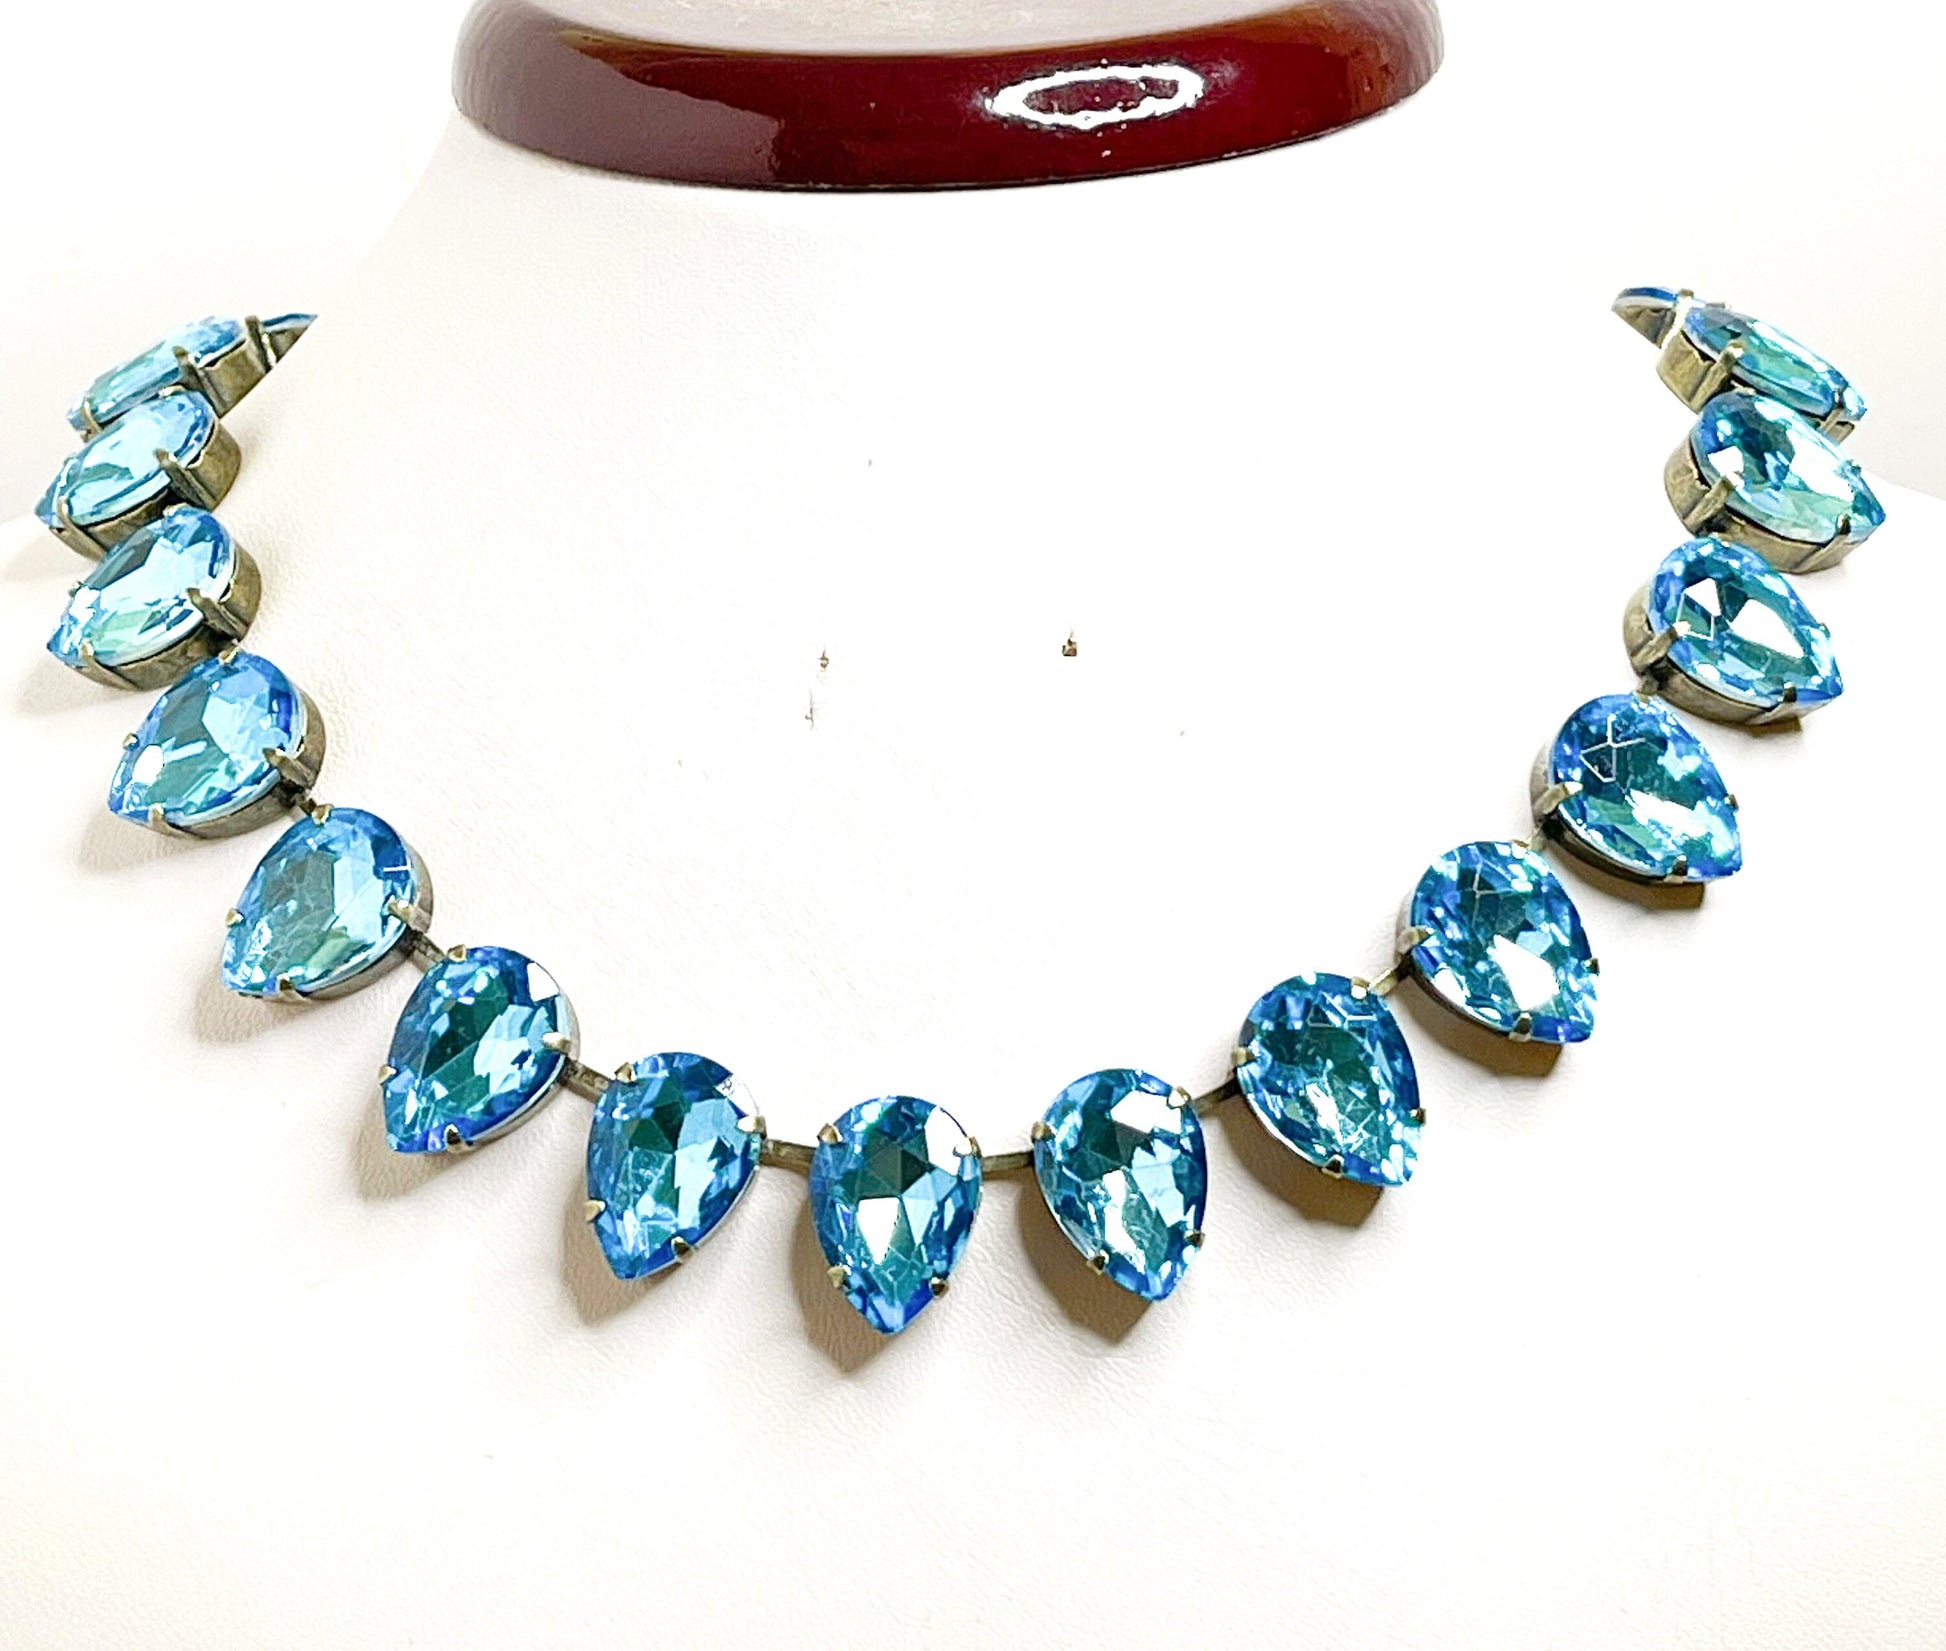 Aquamarine Crystal Necklace, Anna Wintour Style, Georgian Collet, Blue Statement Choker, Riviere Necklace, Necklaces For Women